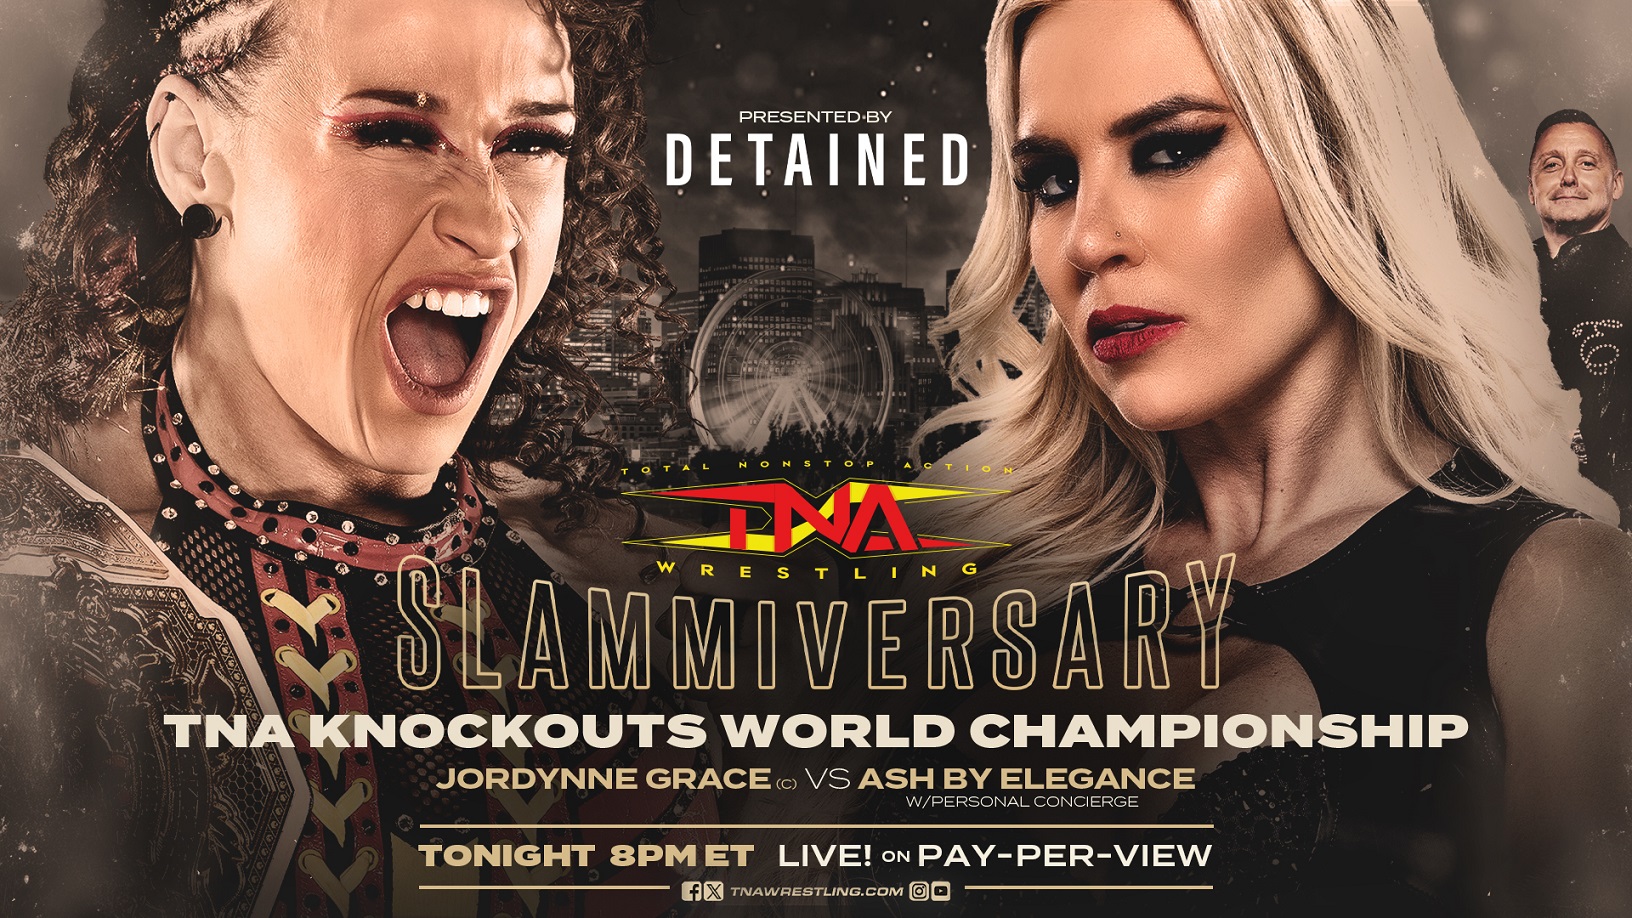 Knockouts World Championship Match At Slammiversary Is Sponsored By The Upcoming Movie, Detained – TNA Wrestling